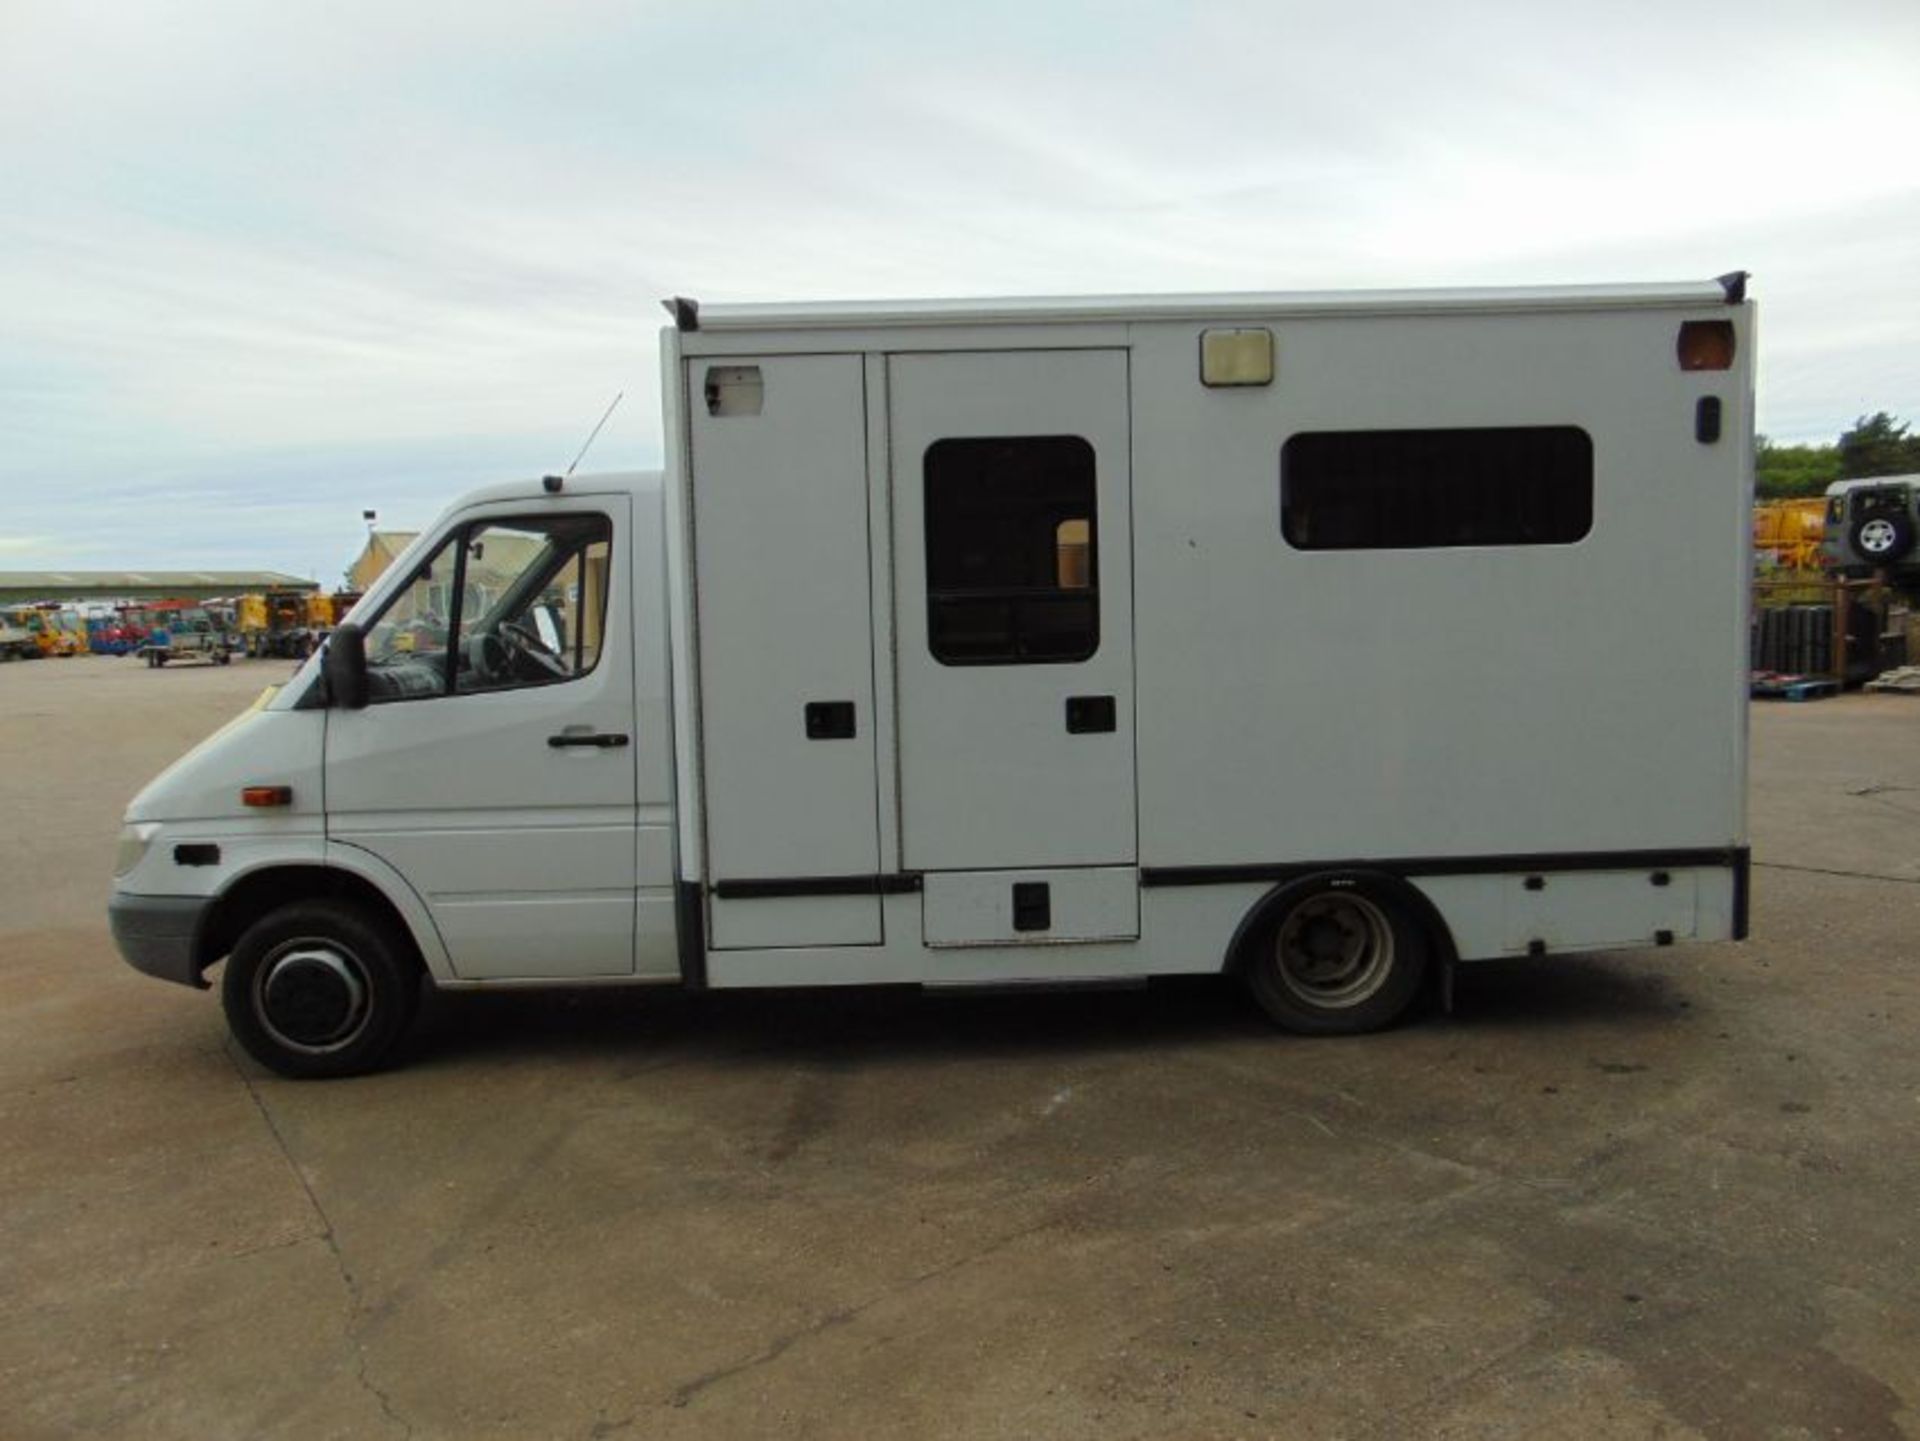 Recent Released by Atomic Weapons Establishment a 2002 Mercedes 418 CDi Ambulance ONLY 32,825 Miles! - Image 4 of 34